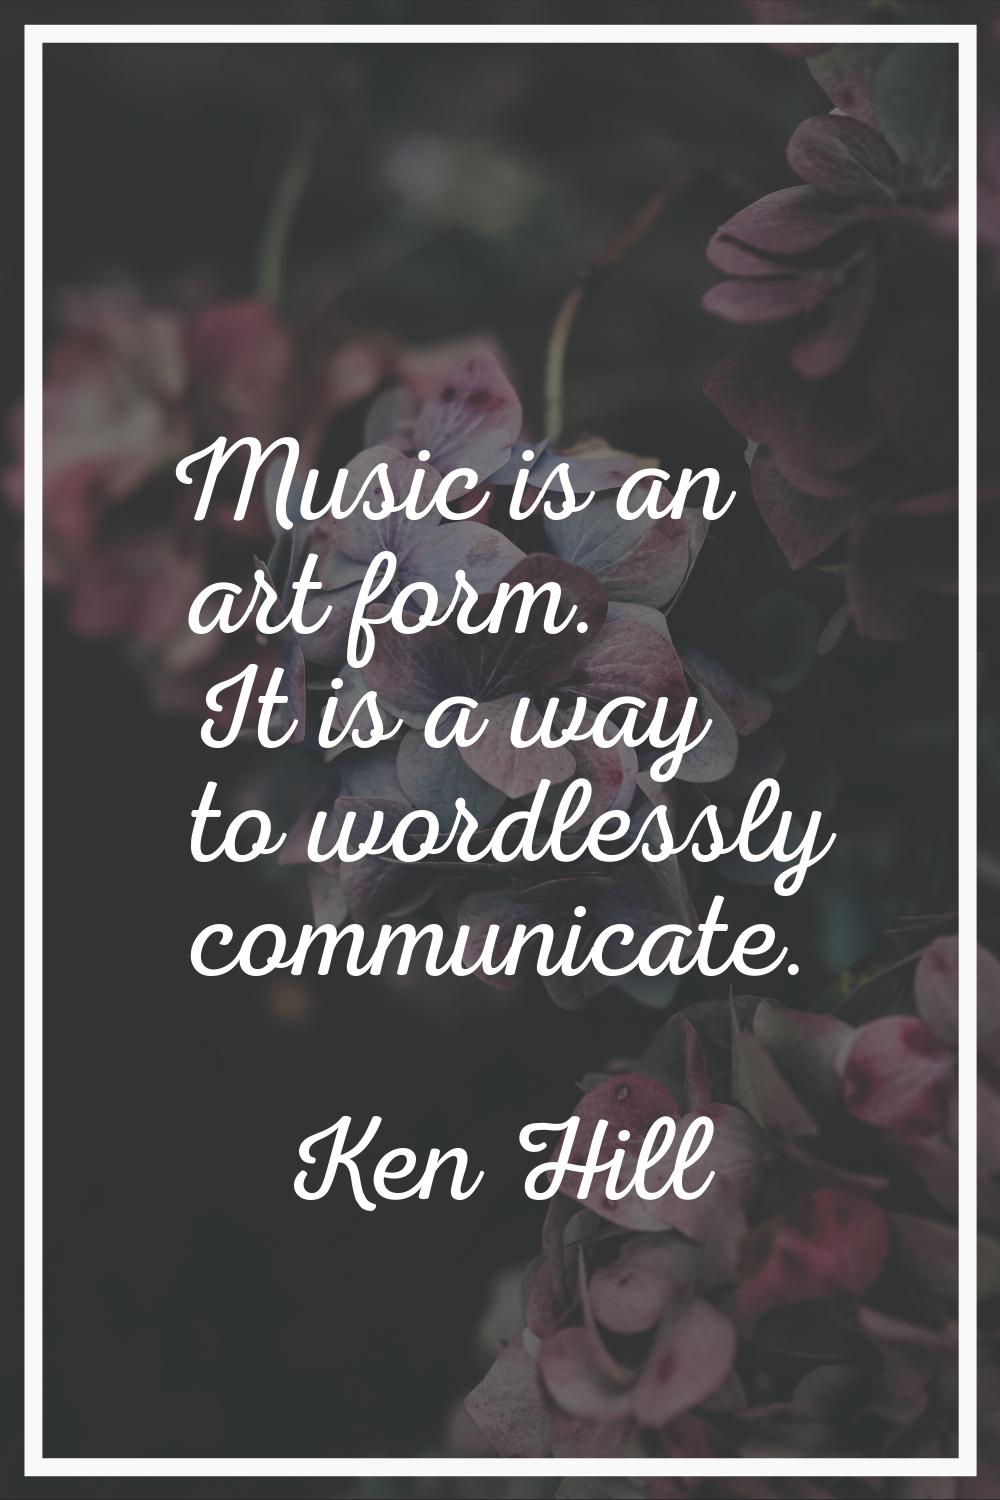 Music is an art form. It is a way to wordlessly communicate.